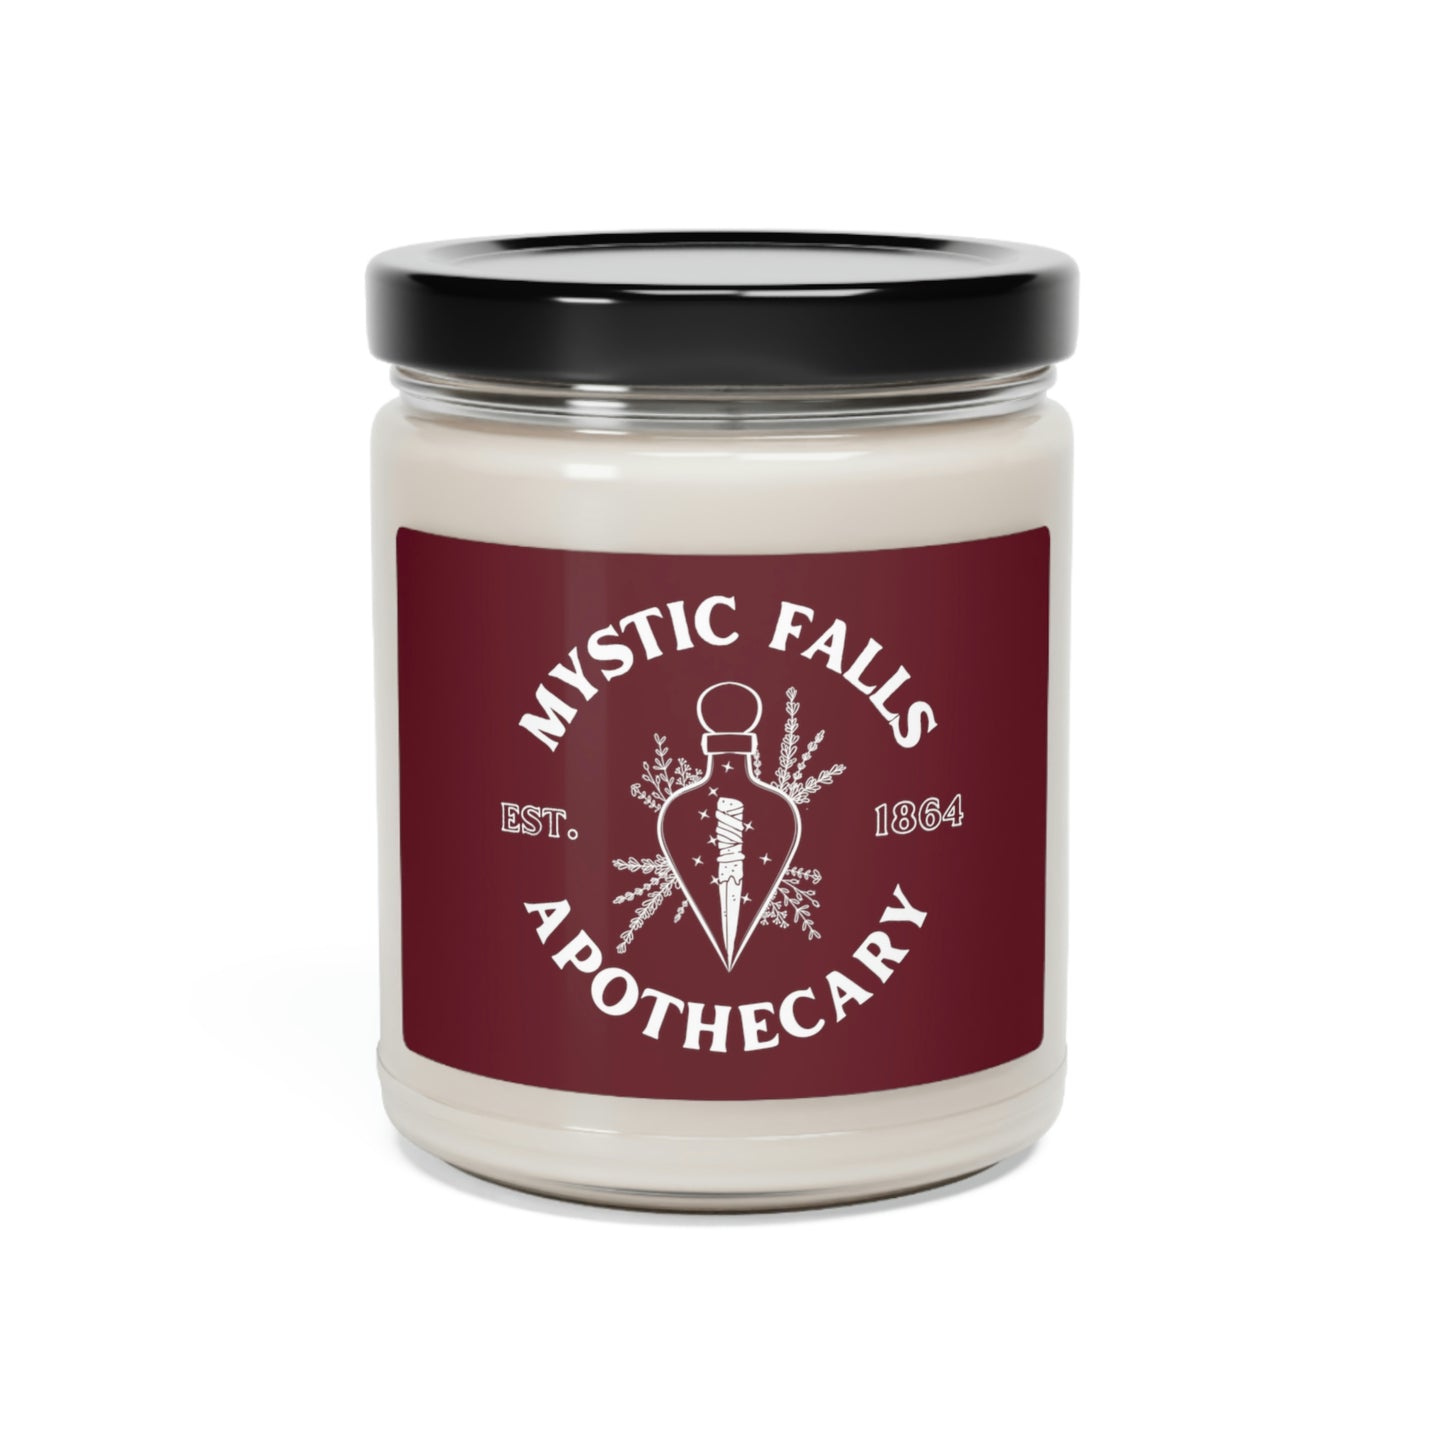 Vampire Falls Scented Soy Candle, 9oz